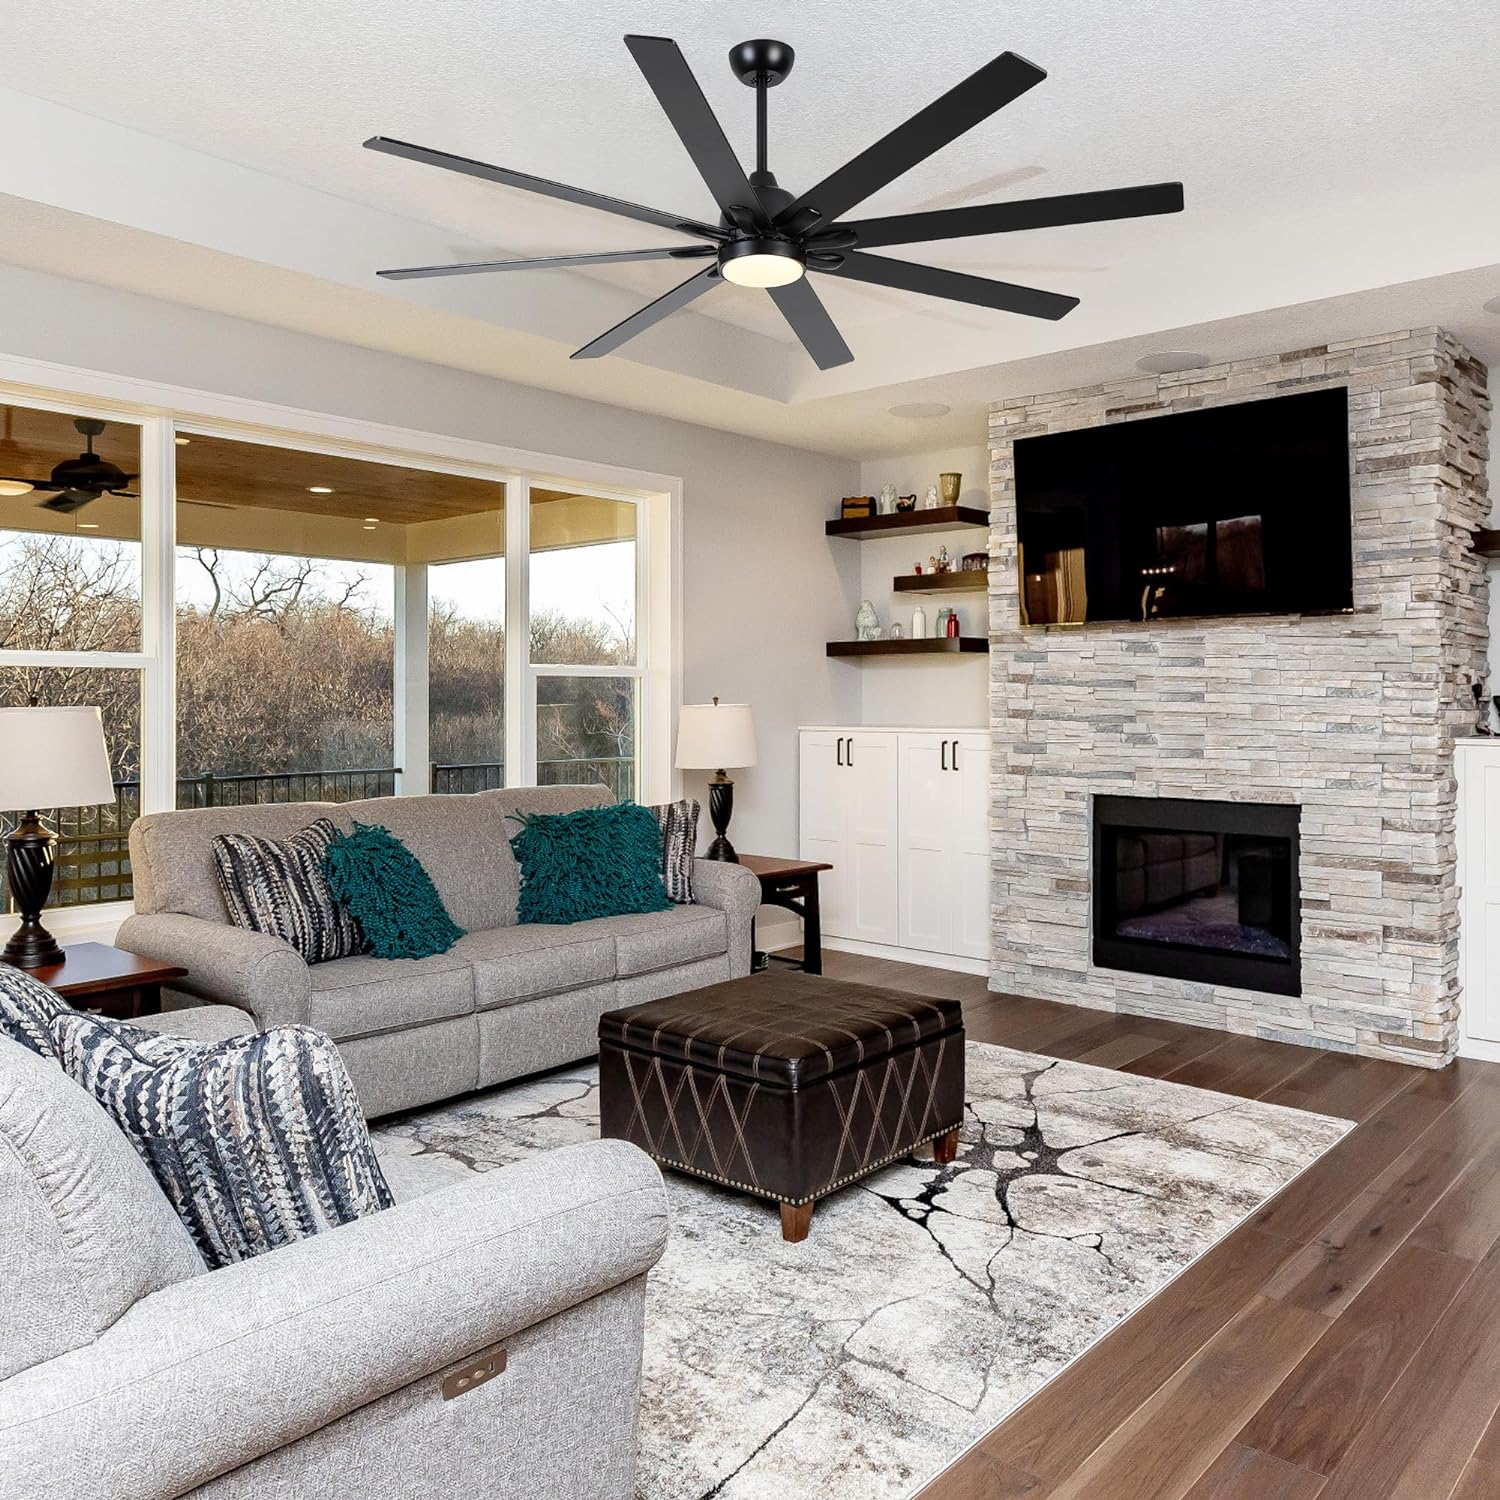 Illuminate Your Space in Style: LED-Enhanced Ceiling Fans for Modern Living